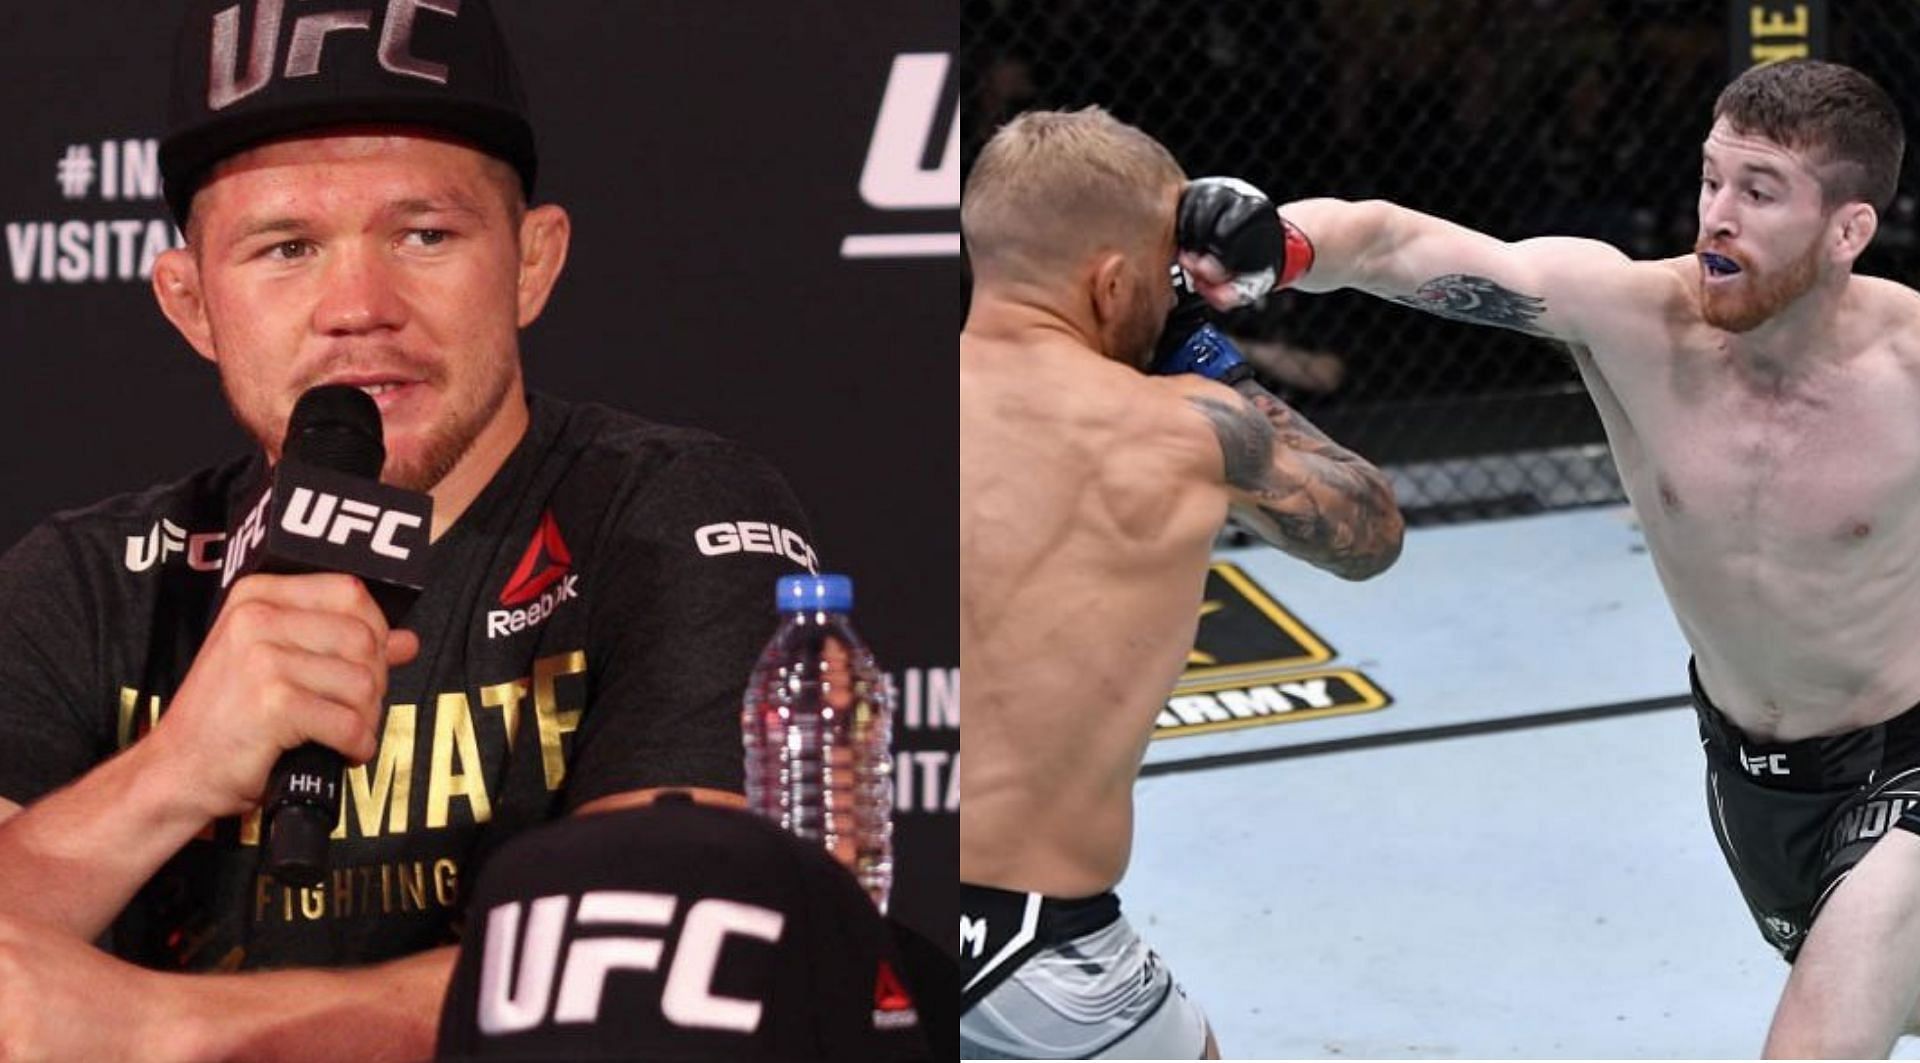 Petr Yan has given his take on the incredible bantamweight fight between TJ Dillashaw and Cory Sandhagen